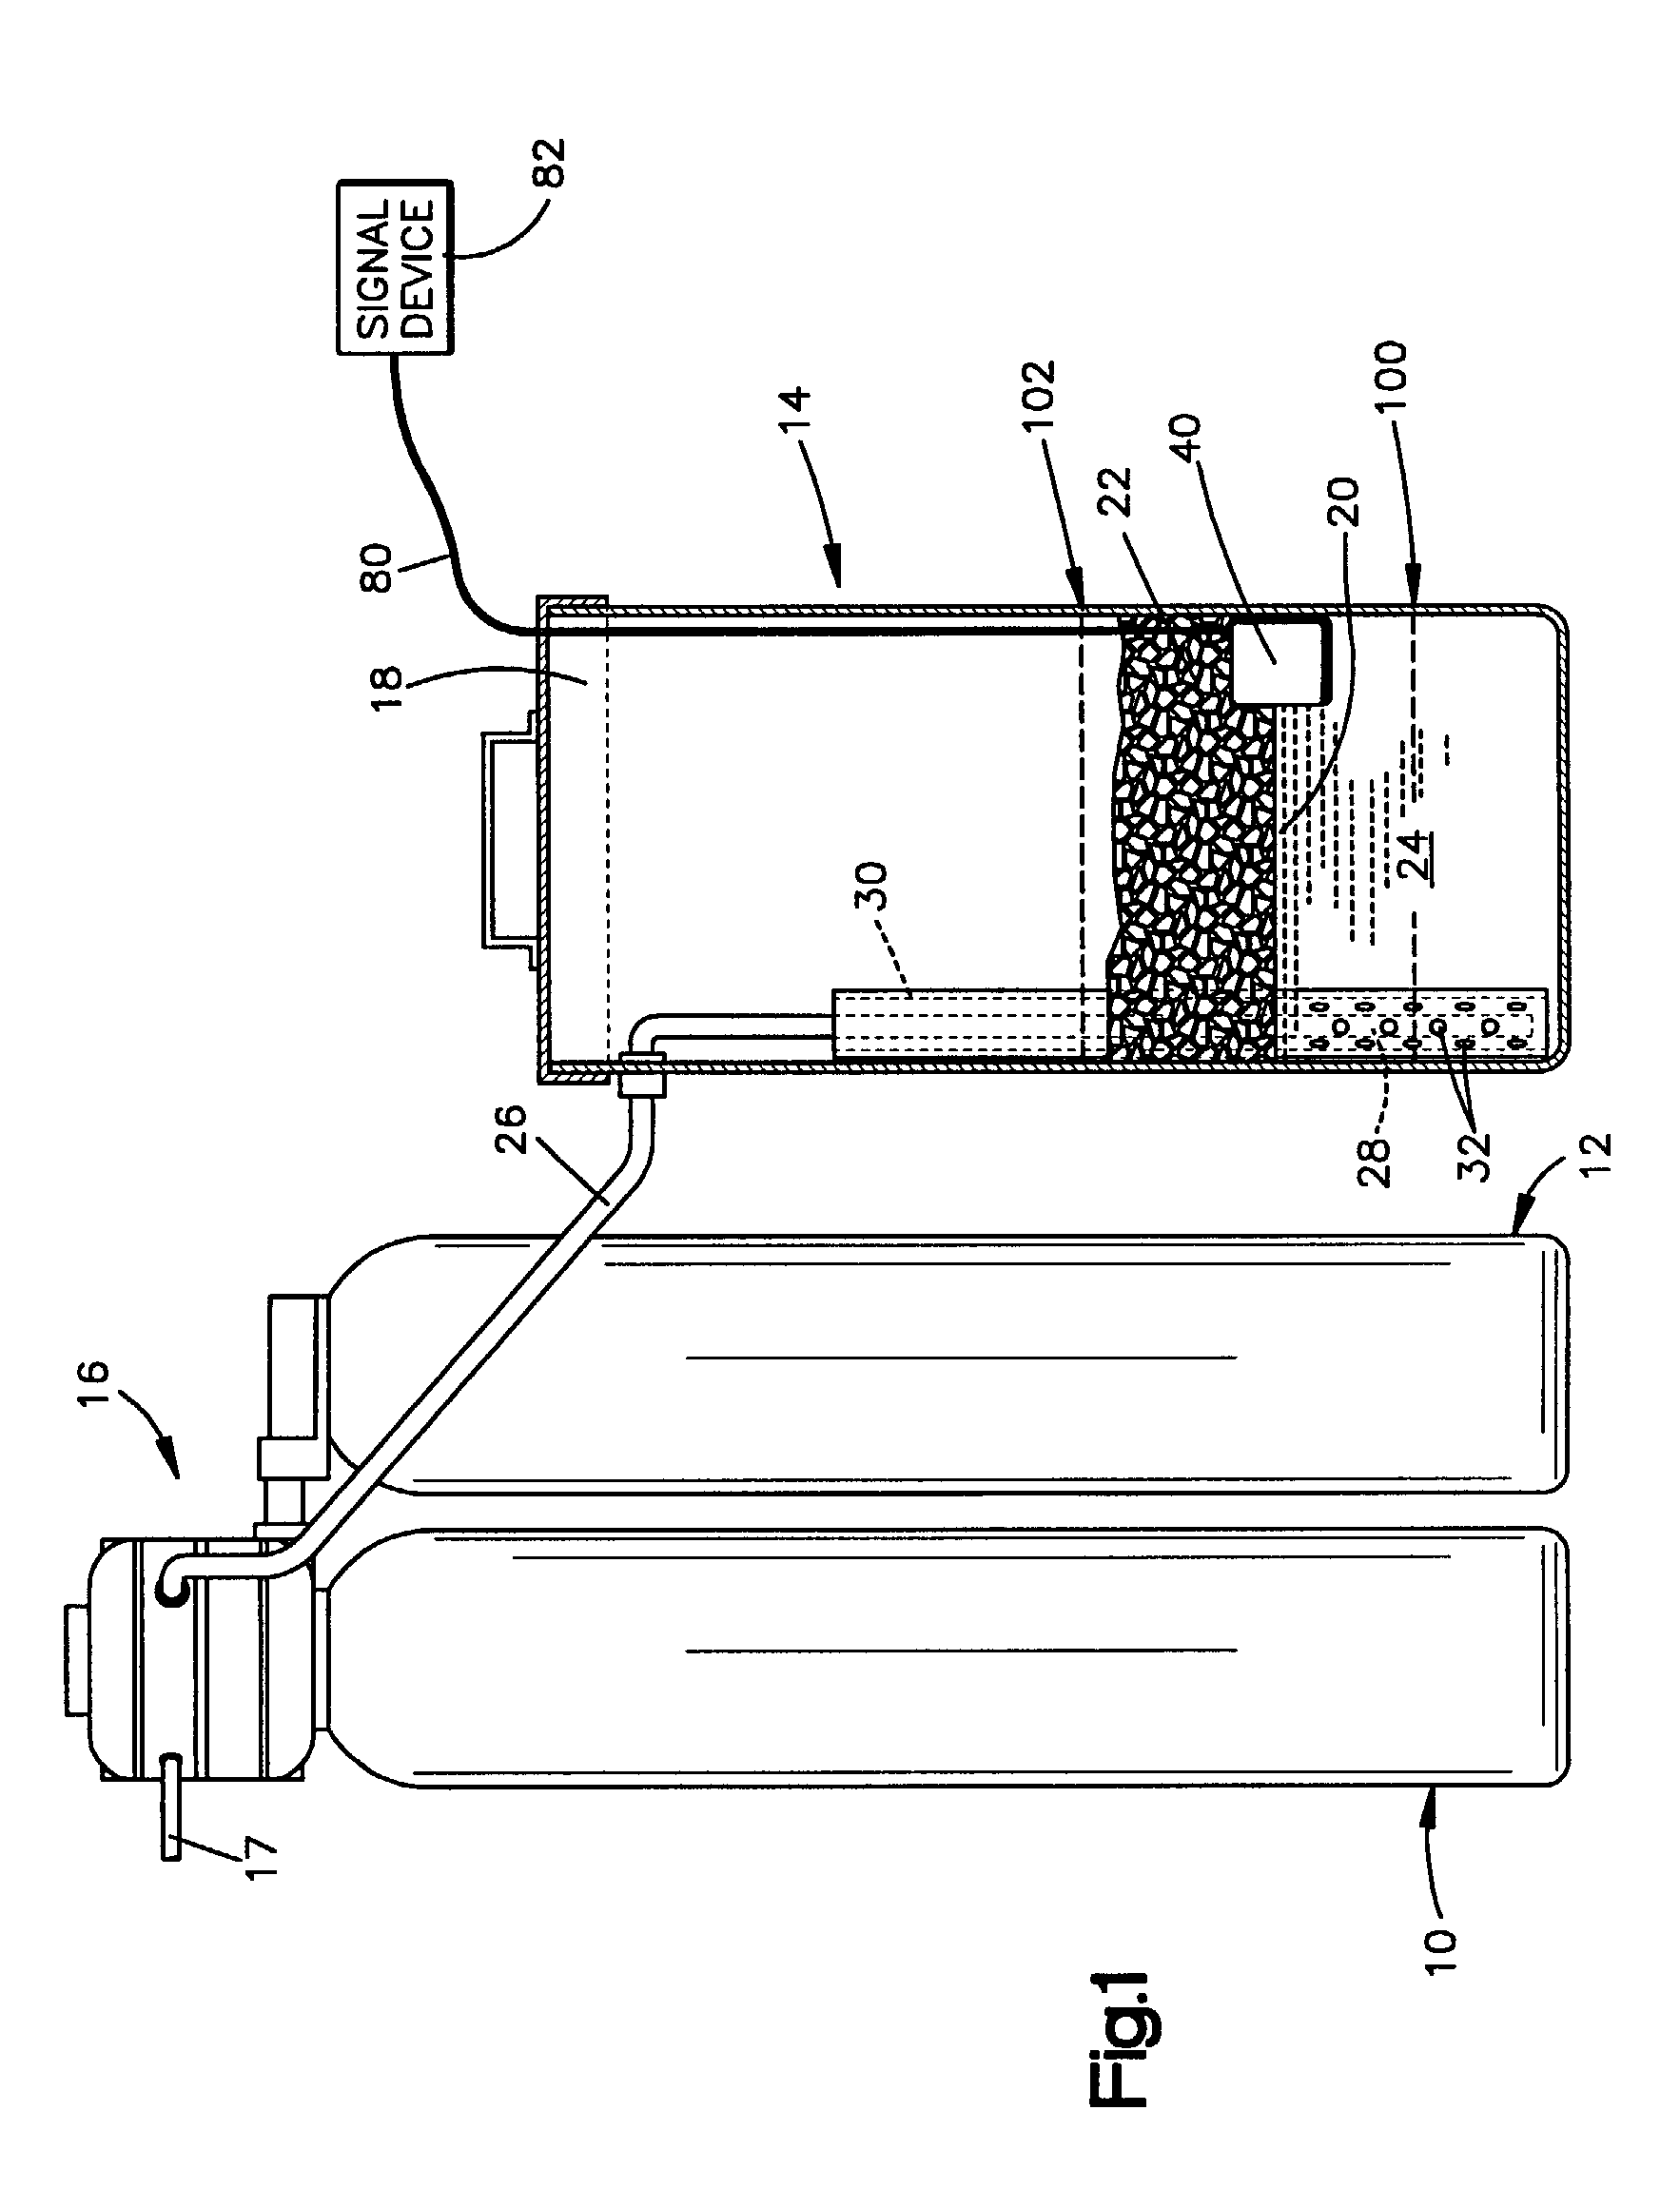 Apparatus and method for detecting a change in a specific gravity of a fluid